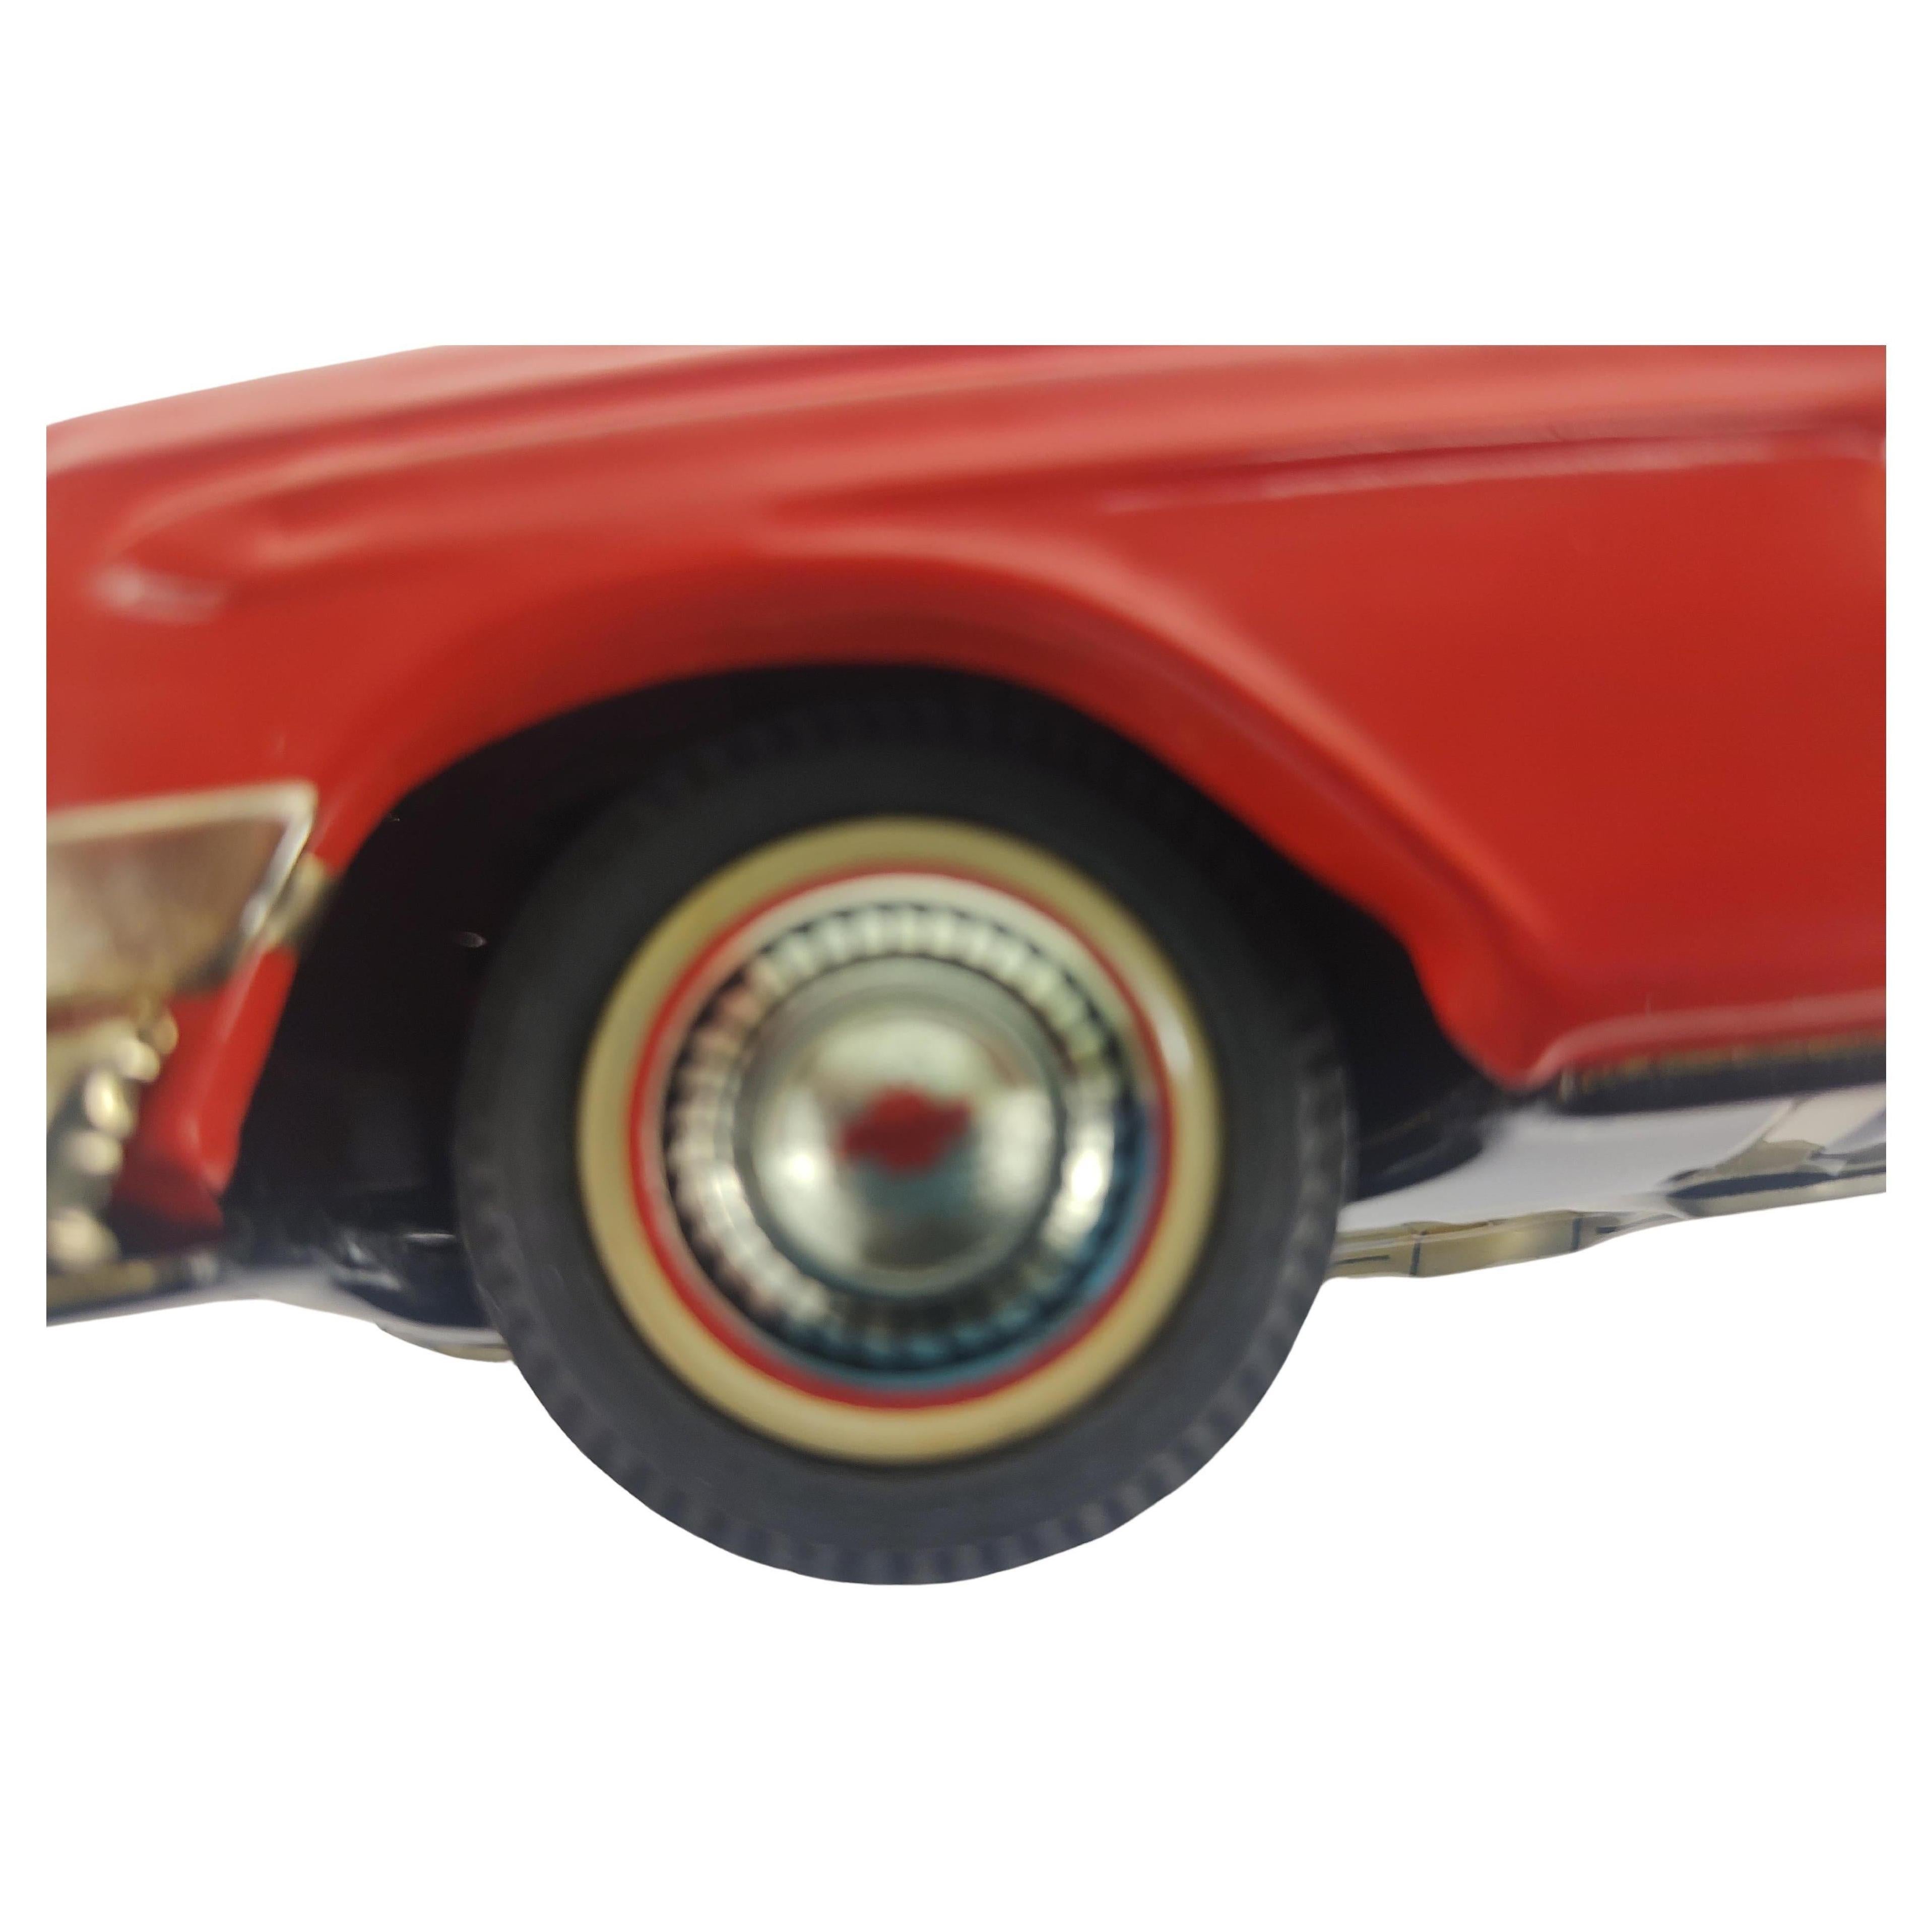 Fantastic Japanese tin litho toy car from the mid to late fifties. A Chevrolet Station Wagon in excellent vintage condition with minimal wear, practically unplayed with. Friction motor as strong as day one. Red & black with fitted interior. Came